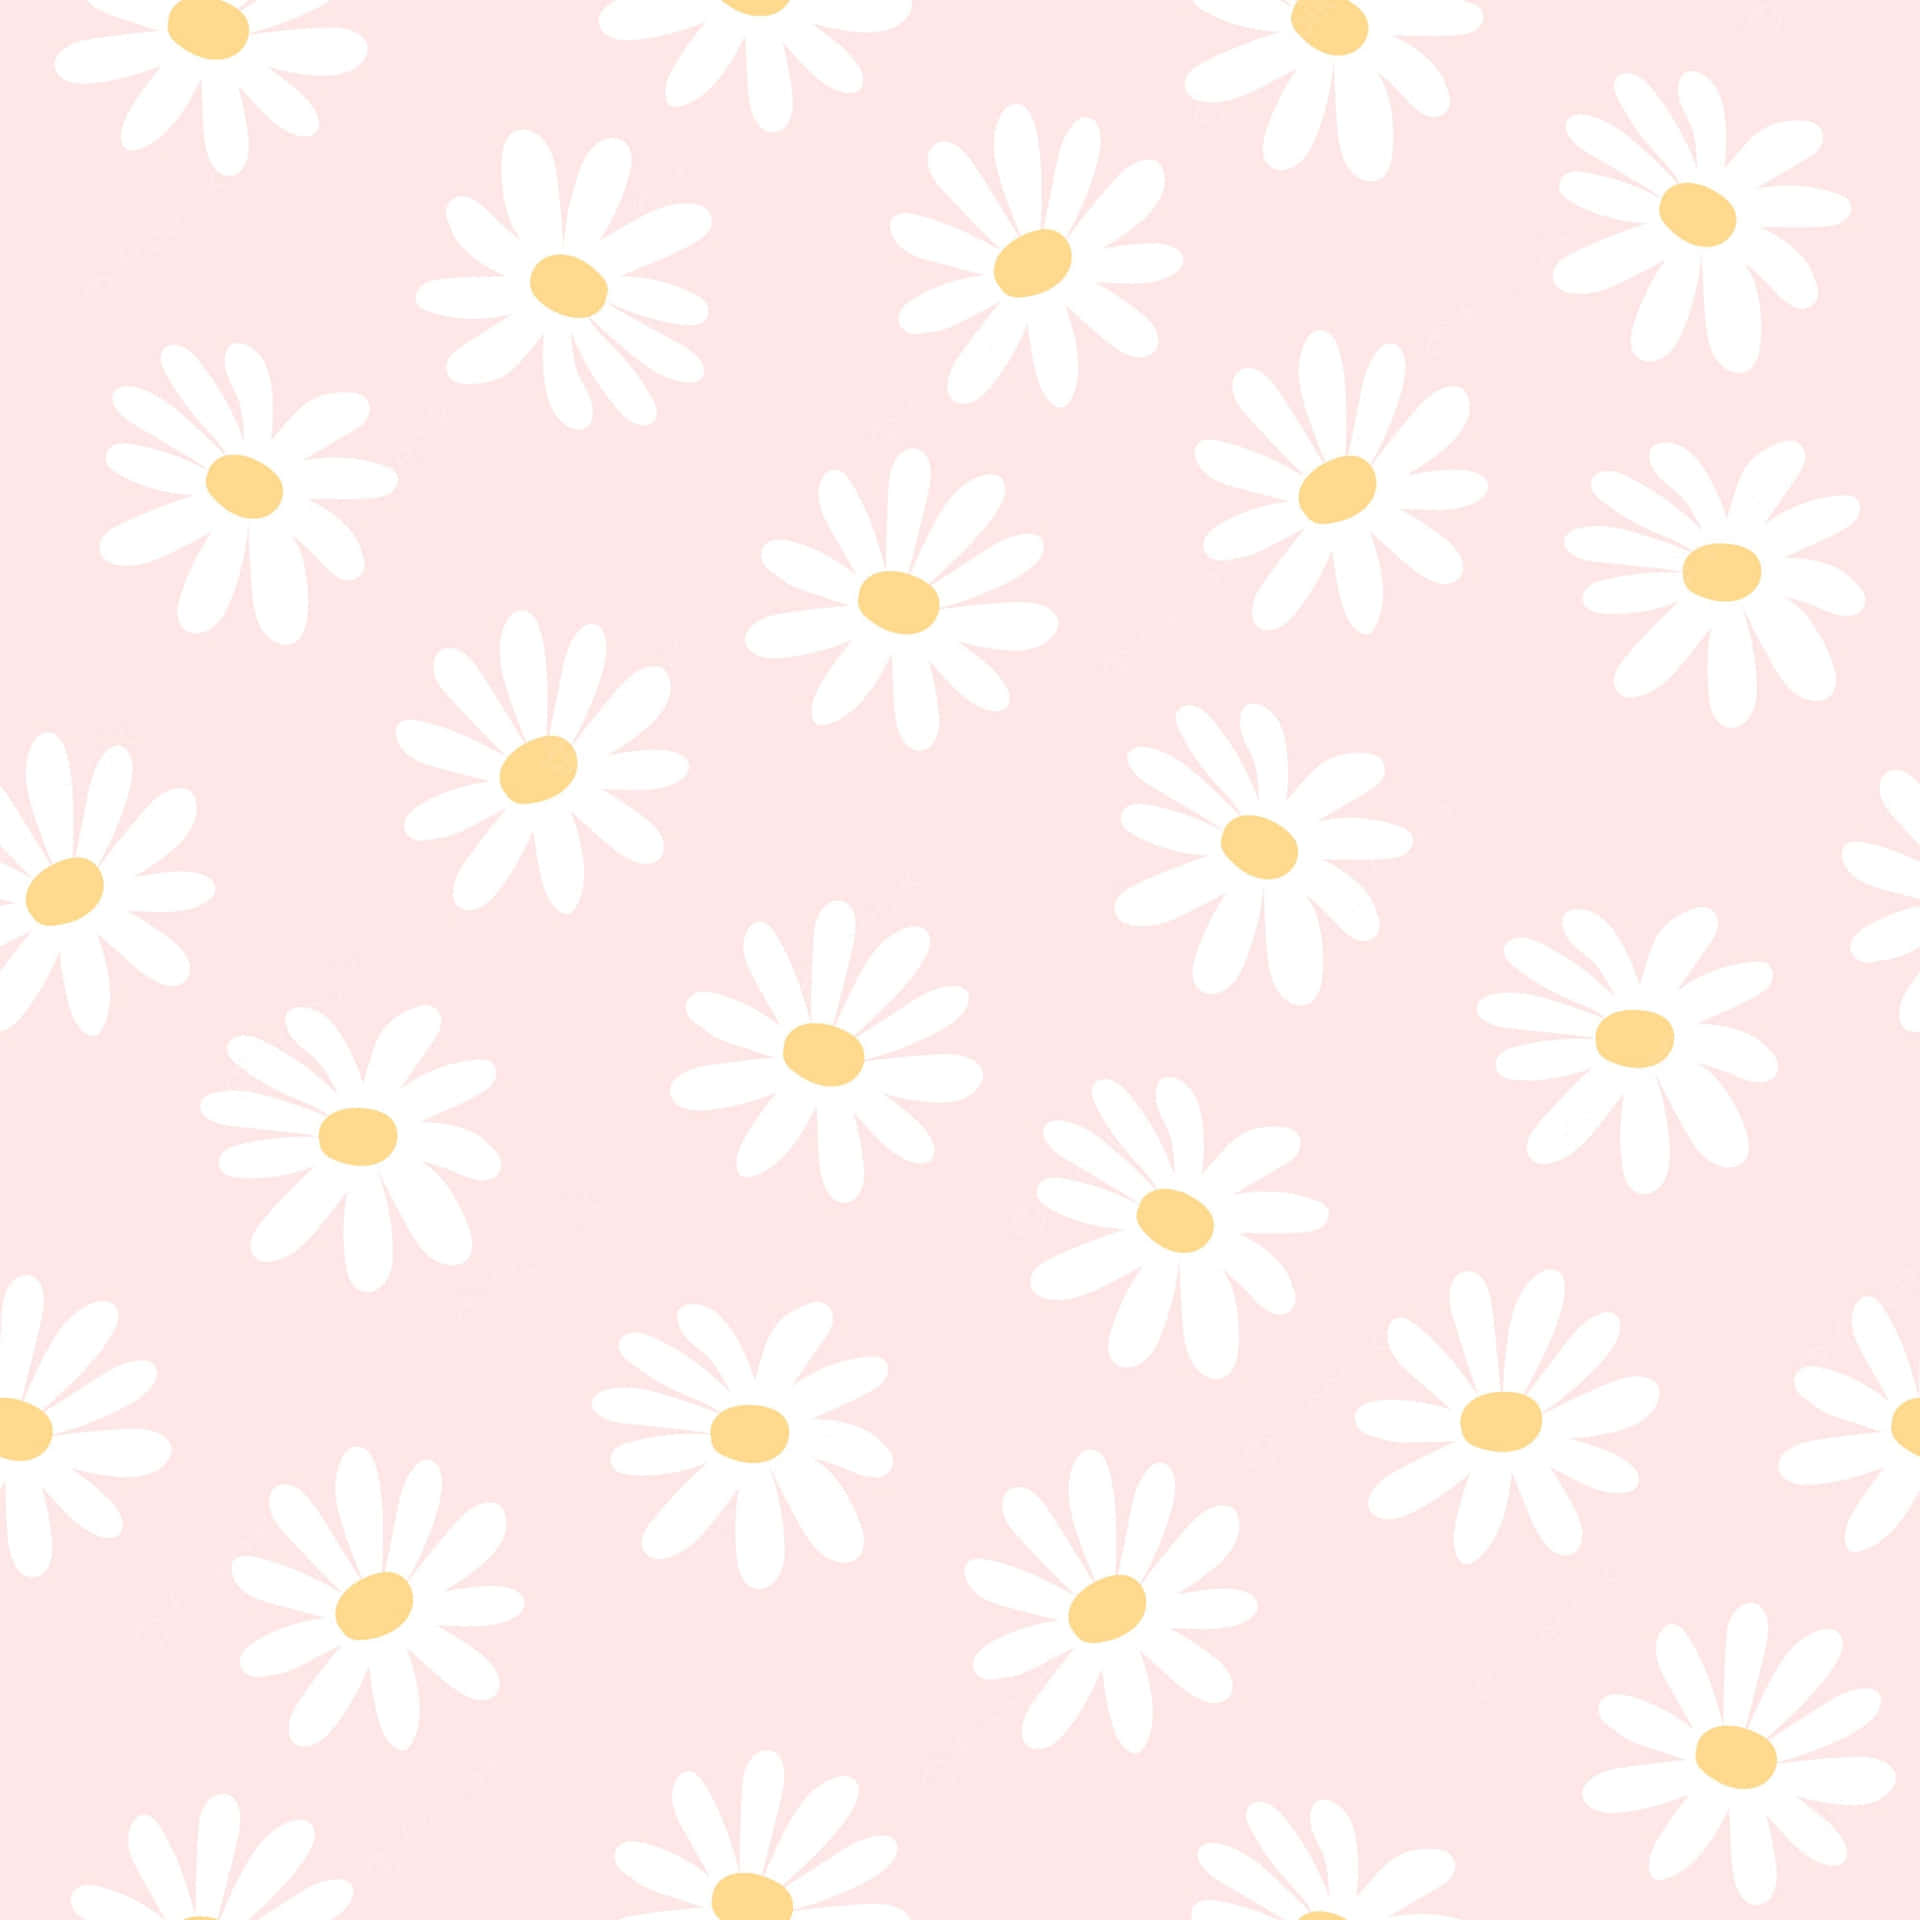 Vibrant and Colorful Cute Flower Background